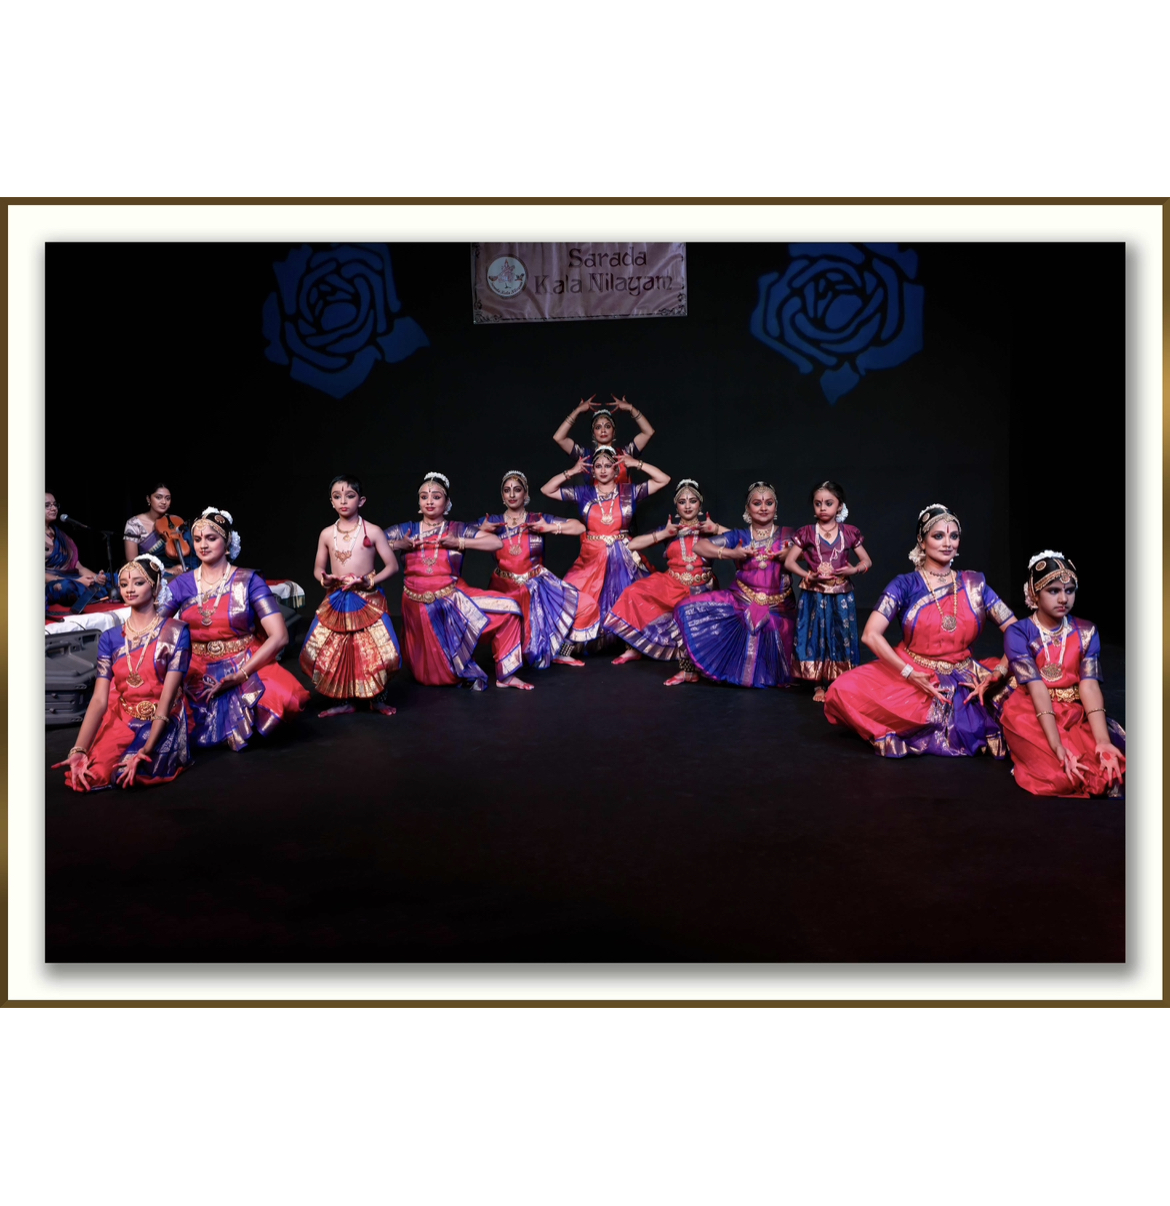 Many child dancers pose side by side in traditional costumes